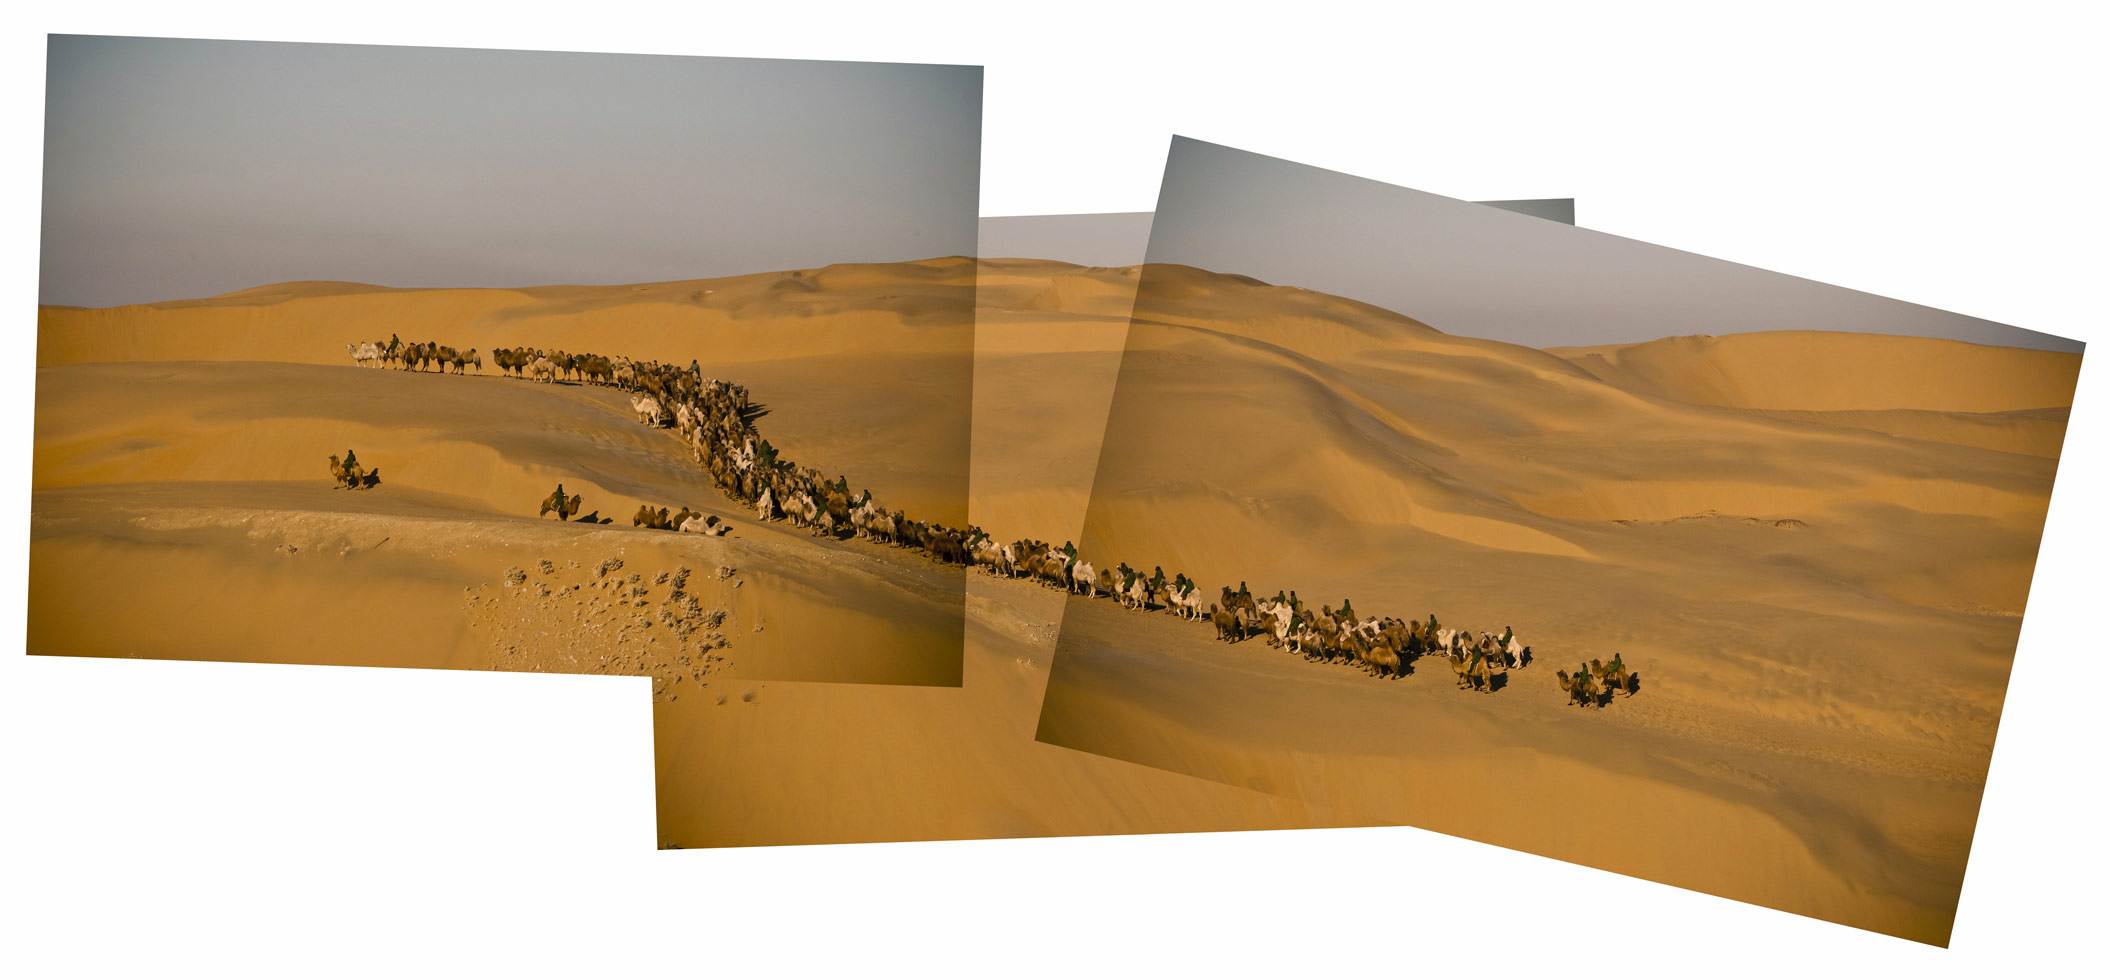 Twenty-five camel herders move a herd of about 200 camels through the sands of the Gobi Desert